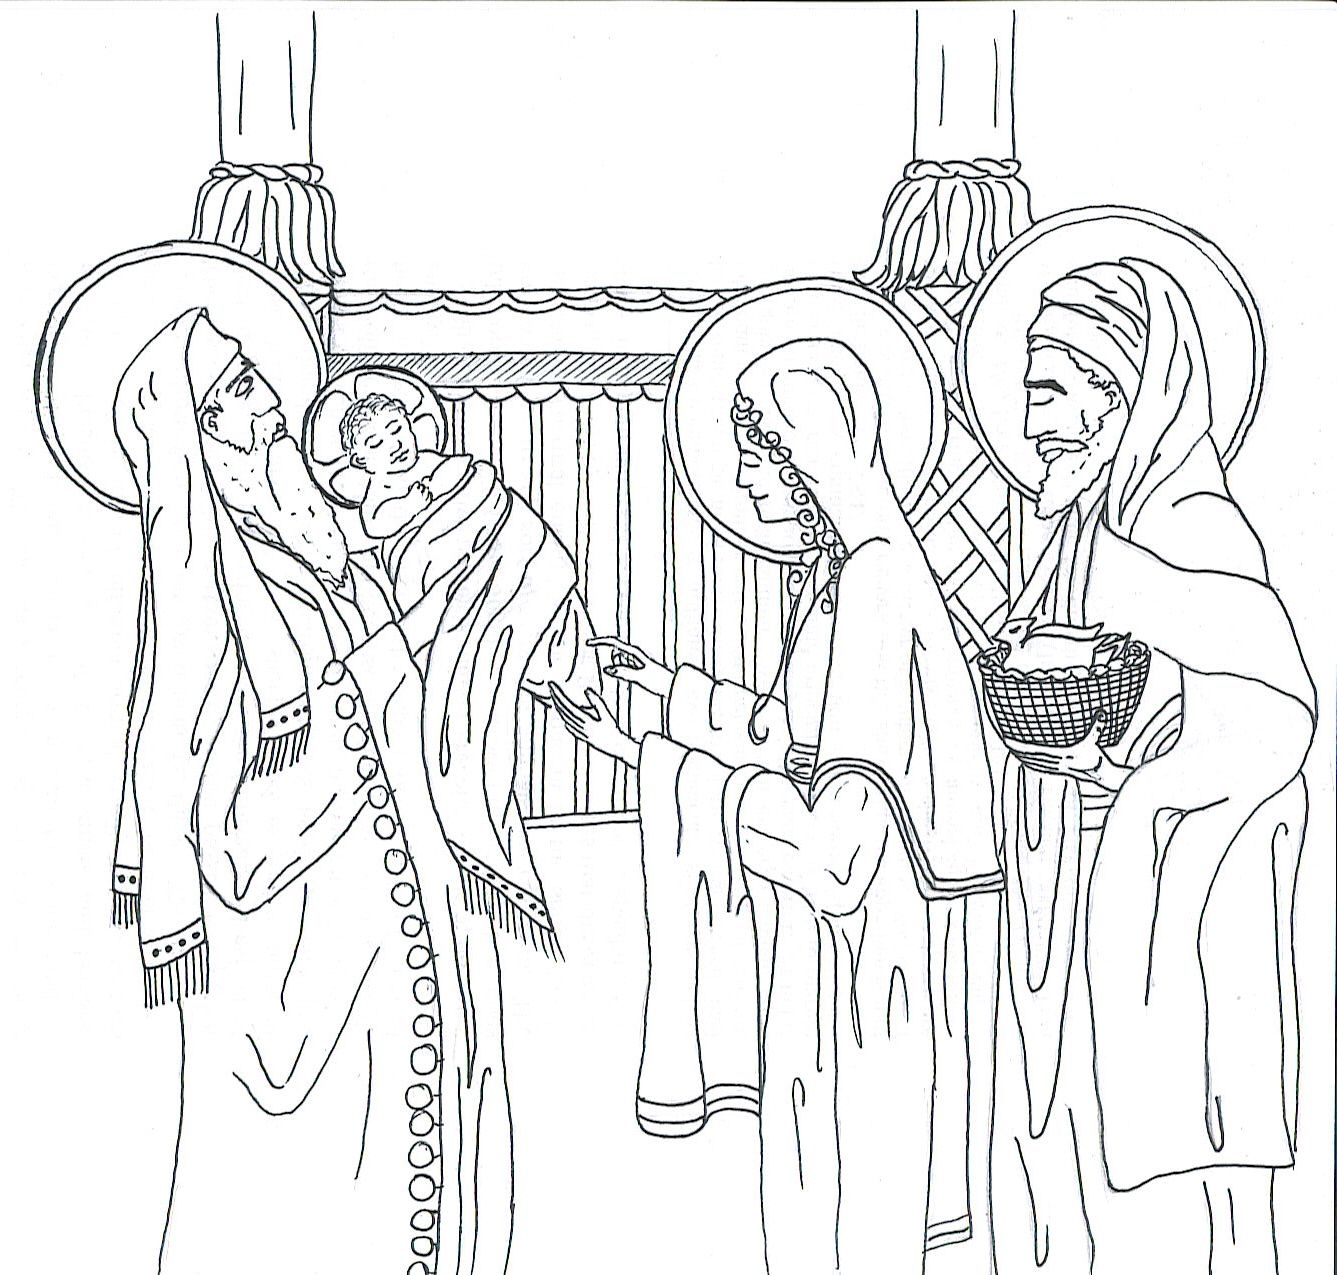 Brilliant orthodox holiday coloring book